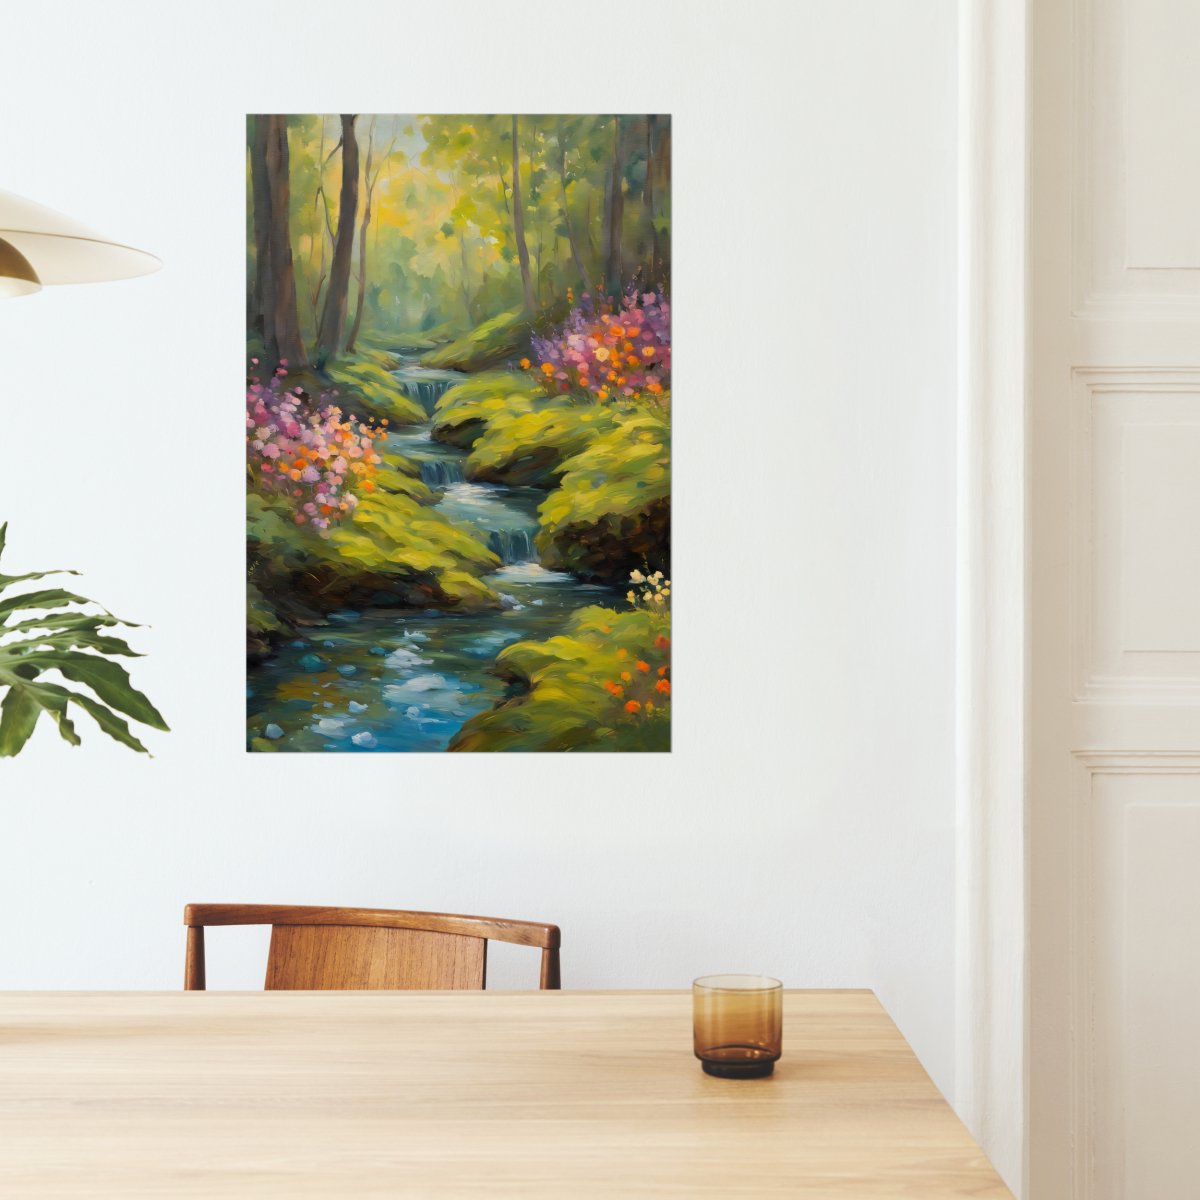 Fairy forest spring - Art print - Poster - Ever colorful